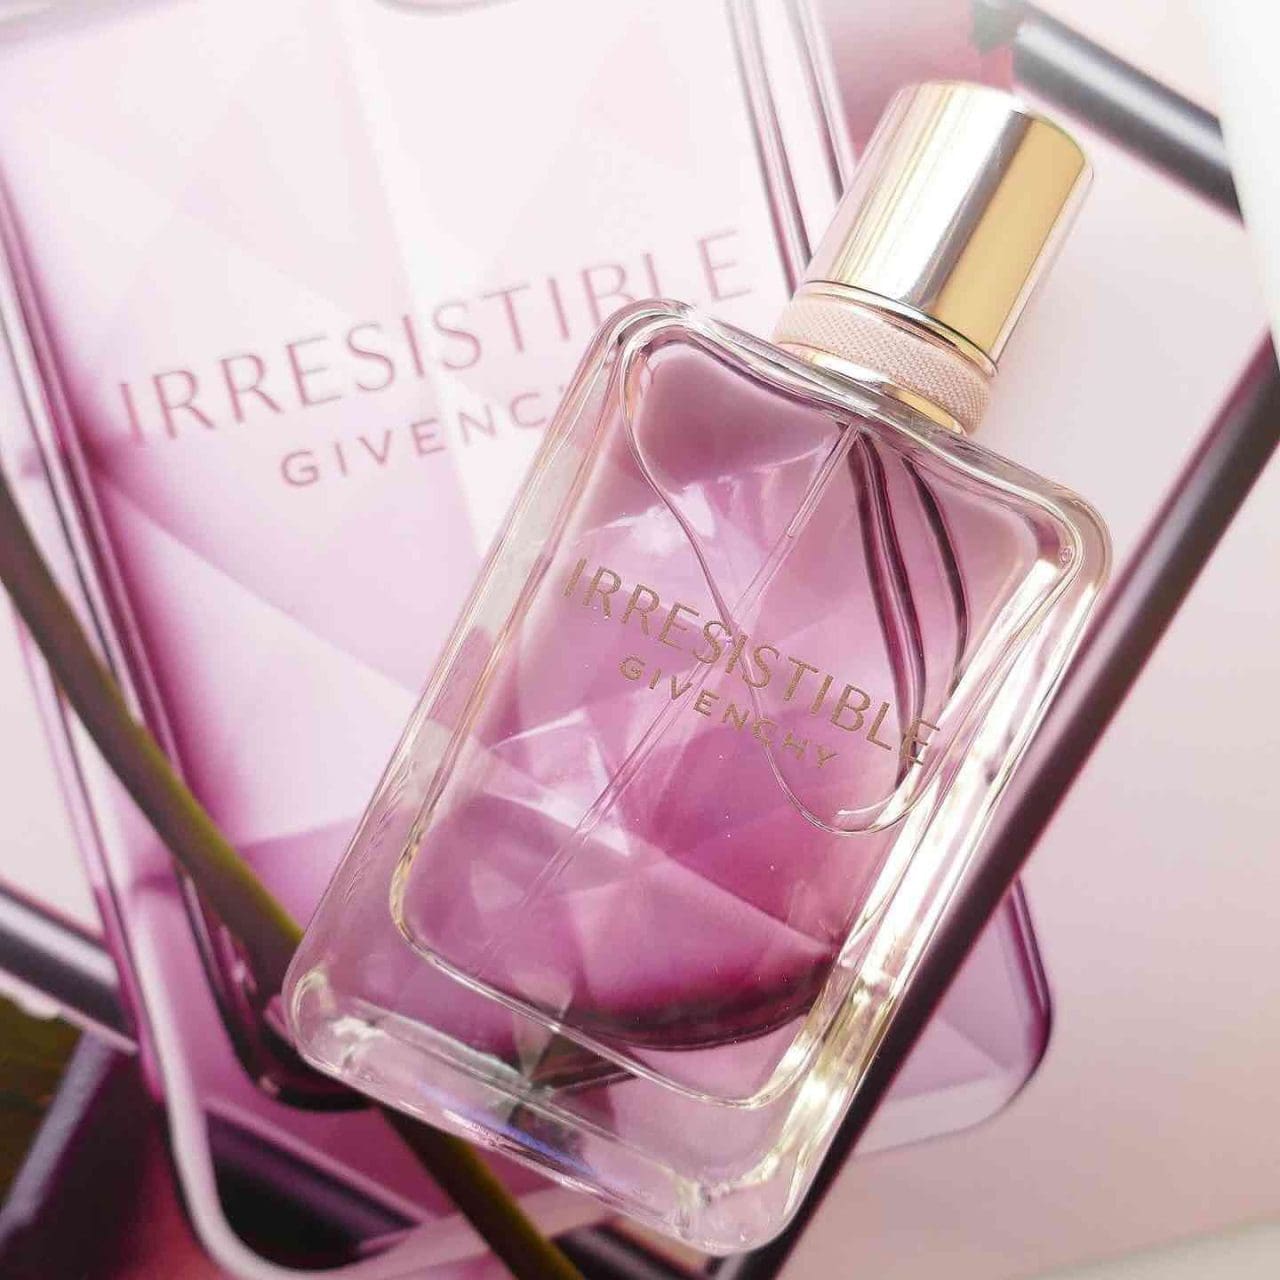 Profumo Givenchy Irresistibile Very Floral